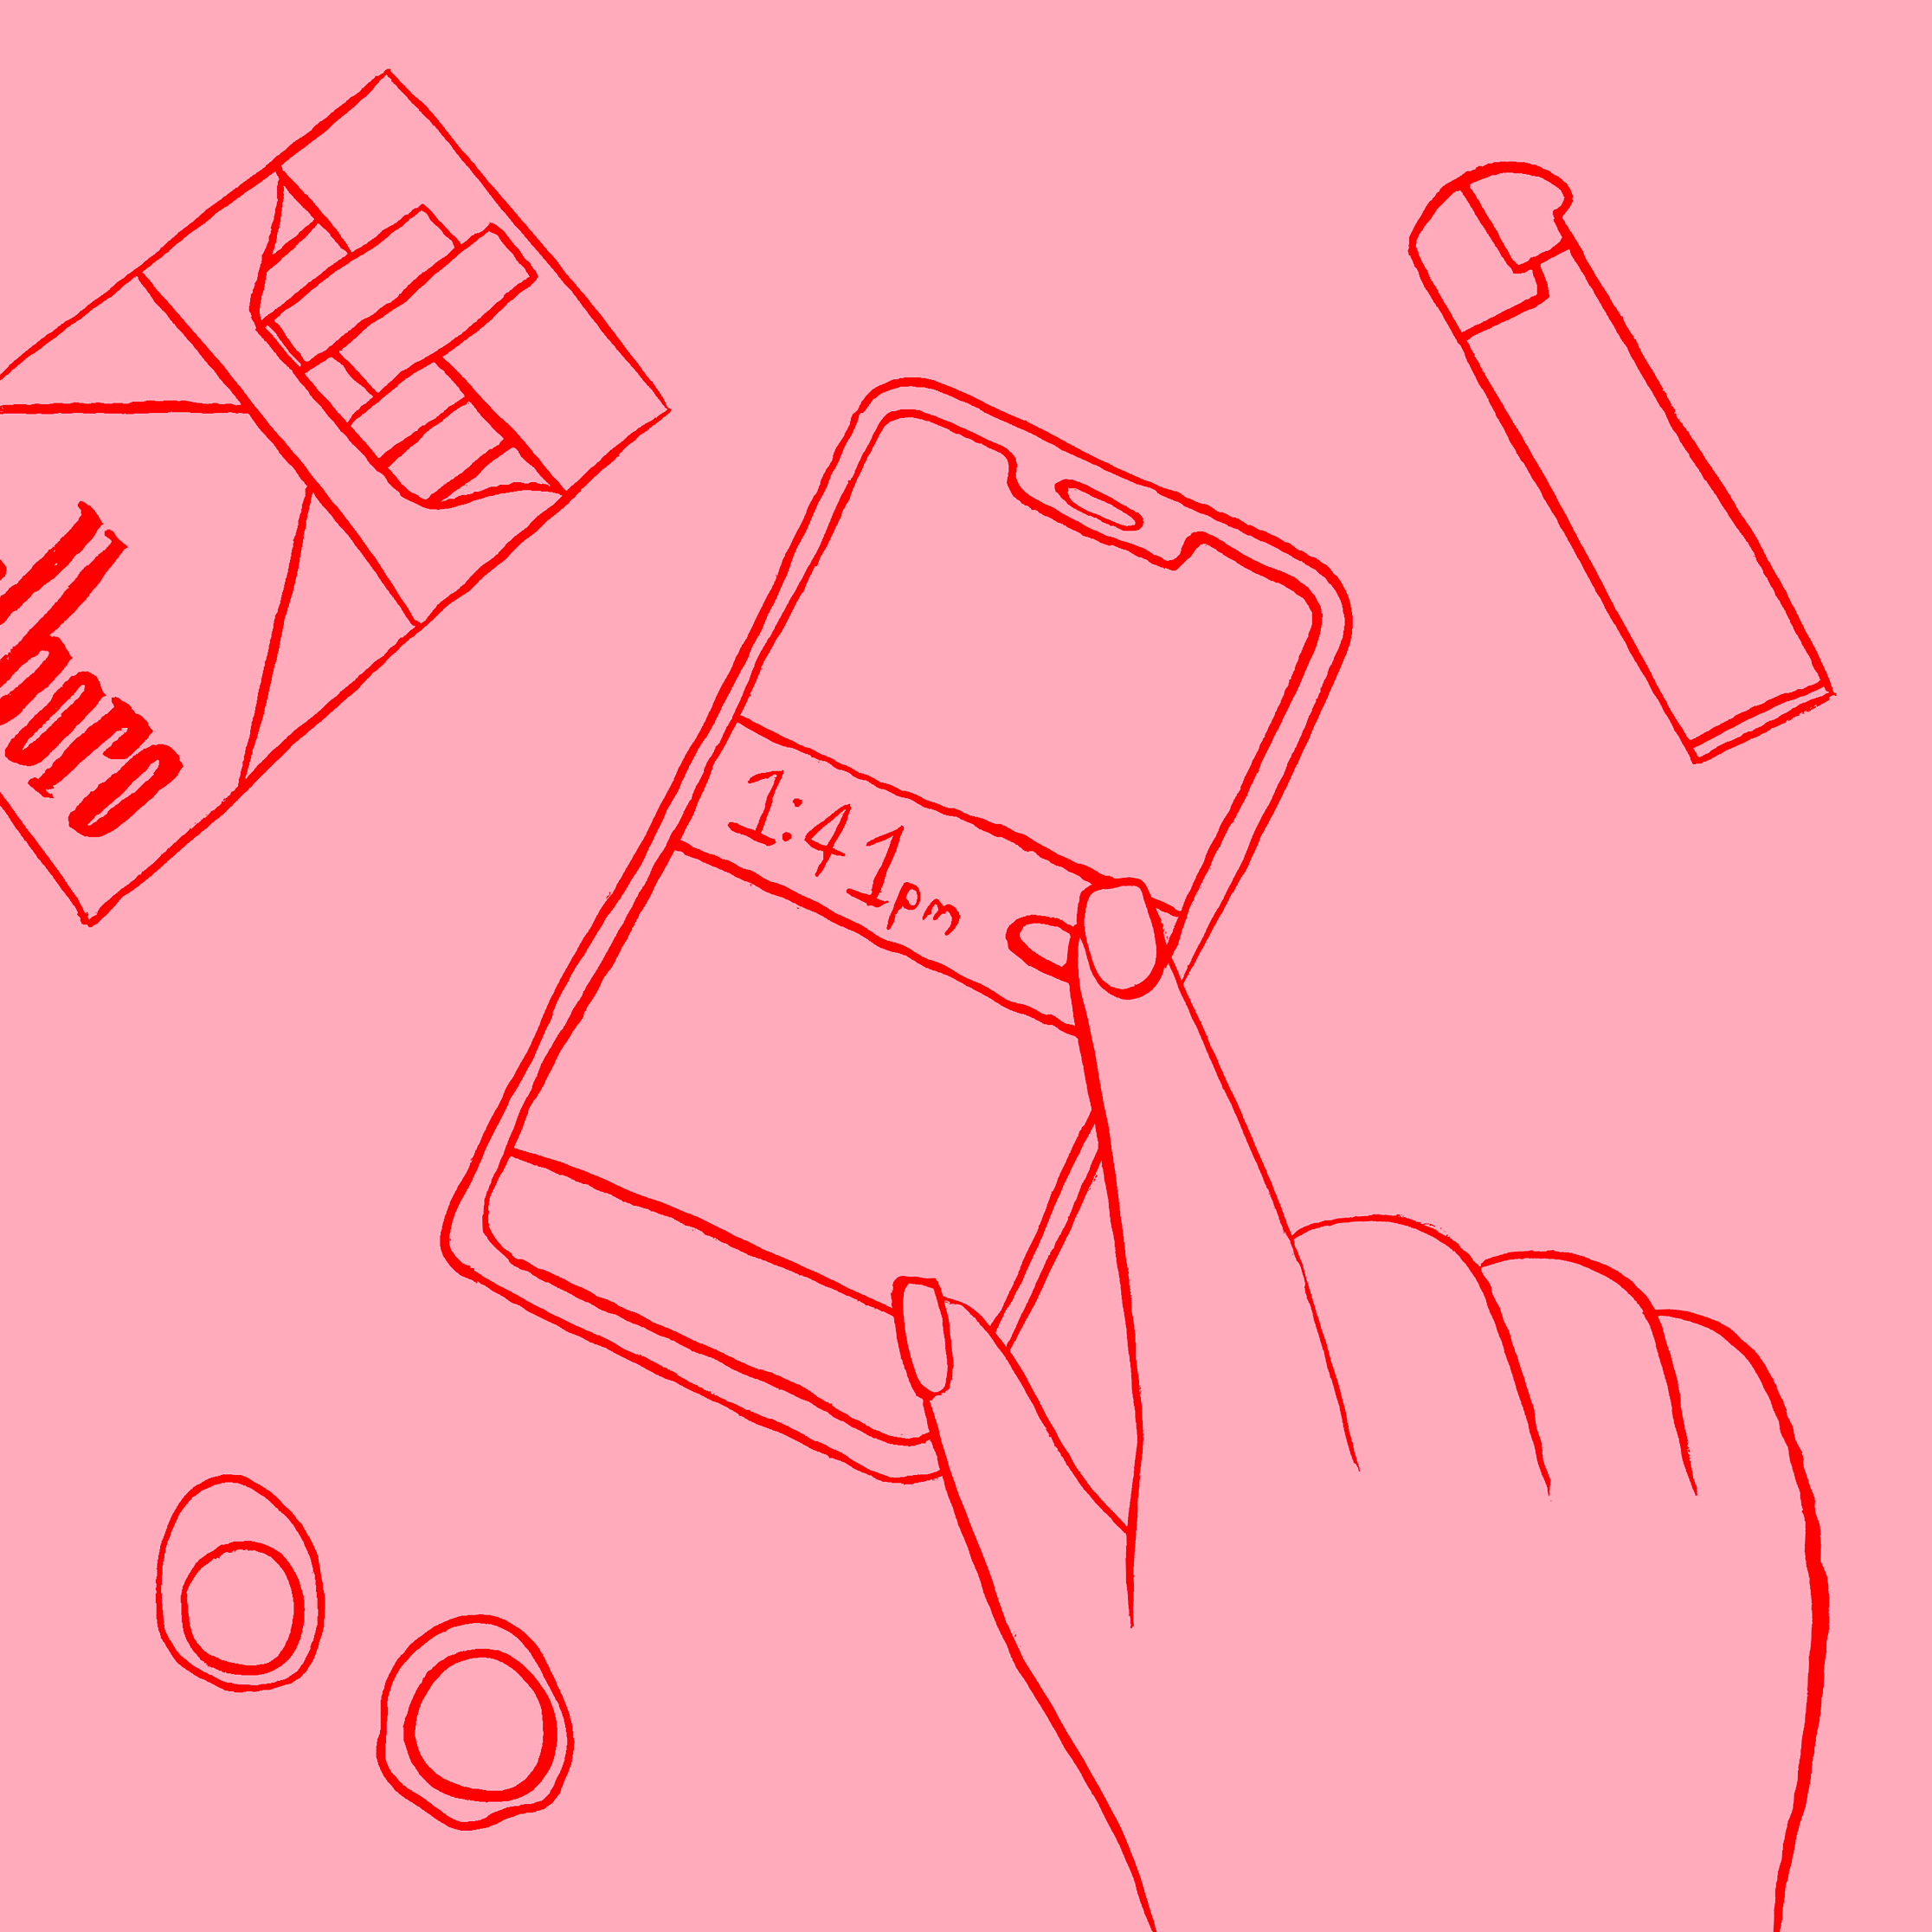 Illustration artwork of a hand interacting with a mobile screen